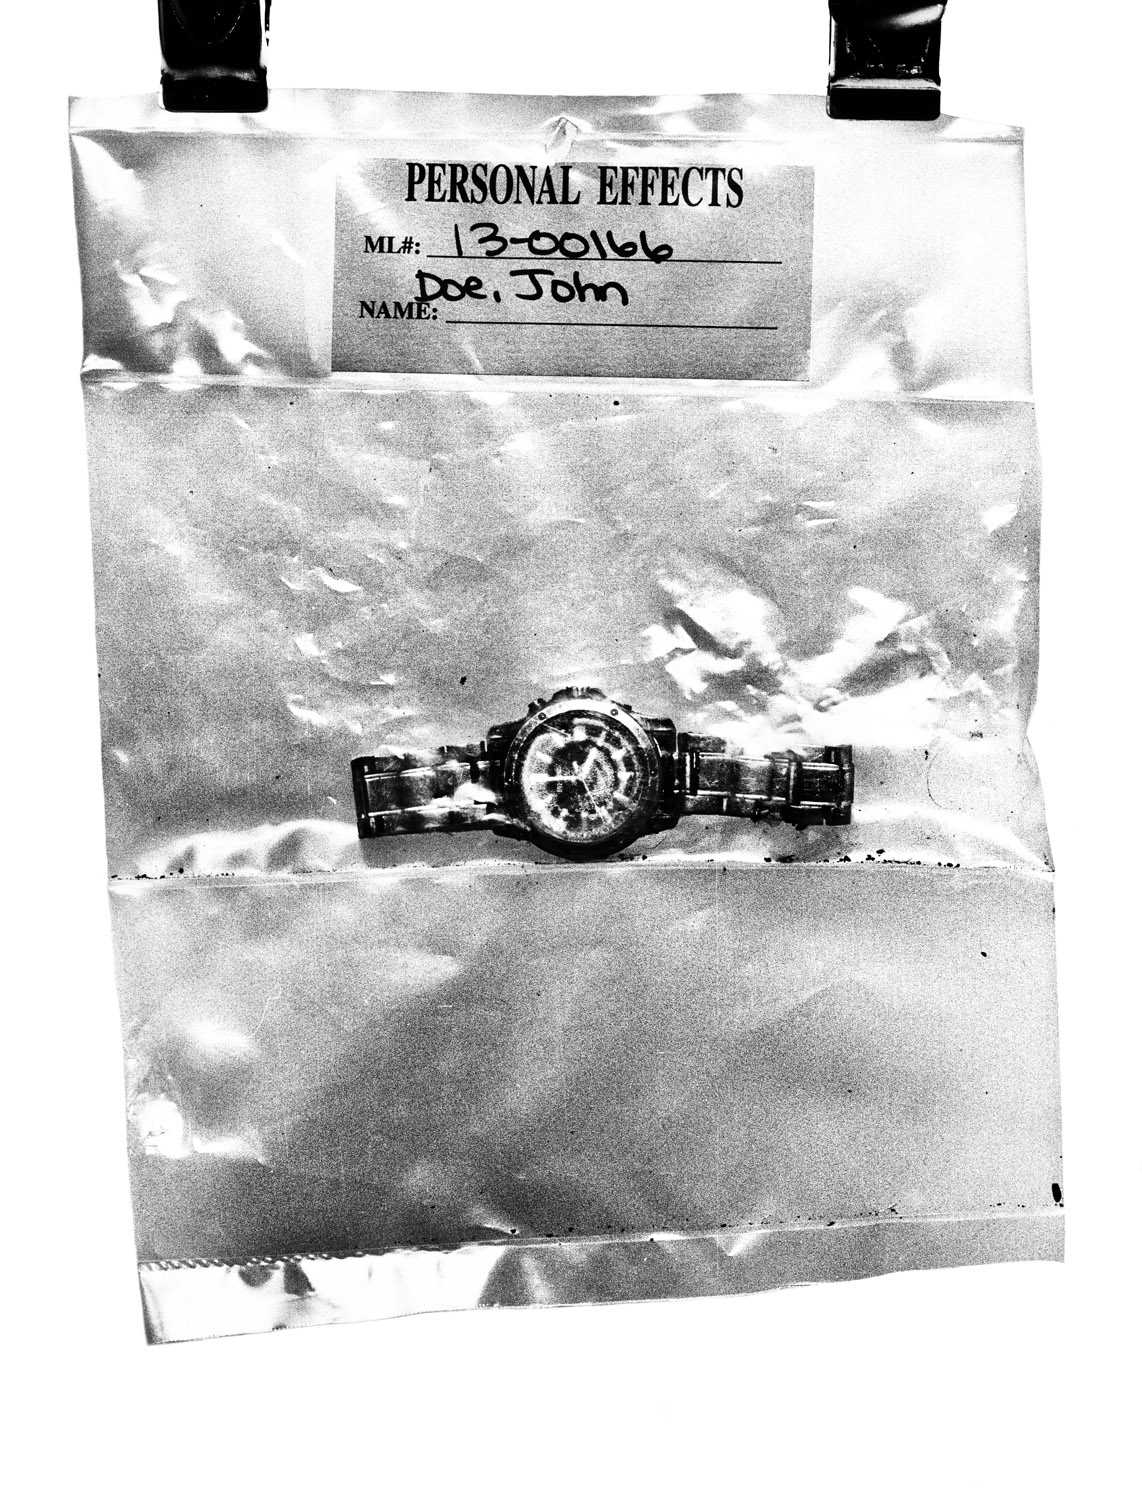 Tucson, Ariz. | 
                              July 30, 2013
                              
                              Personal effects found with migrant remains, like this watch, are cataloged at the Pima County Office of the Medical Examiner in Arizona.